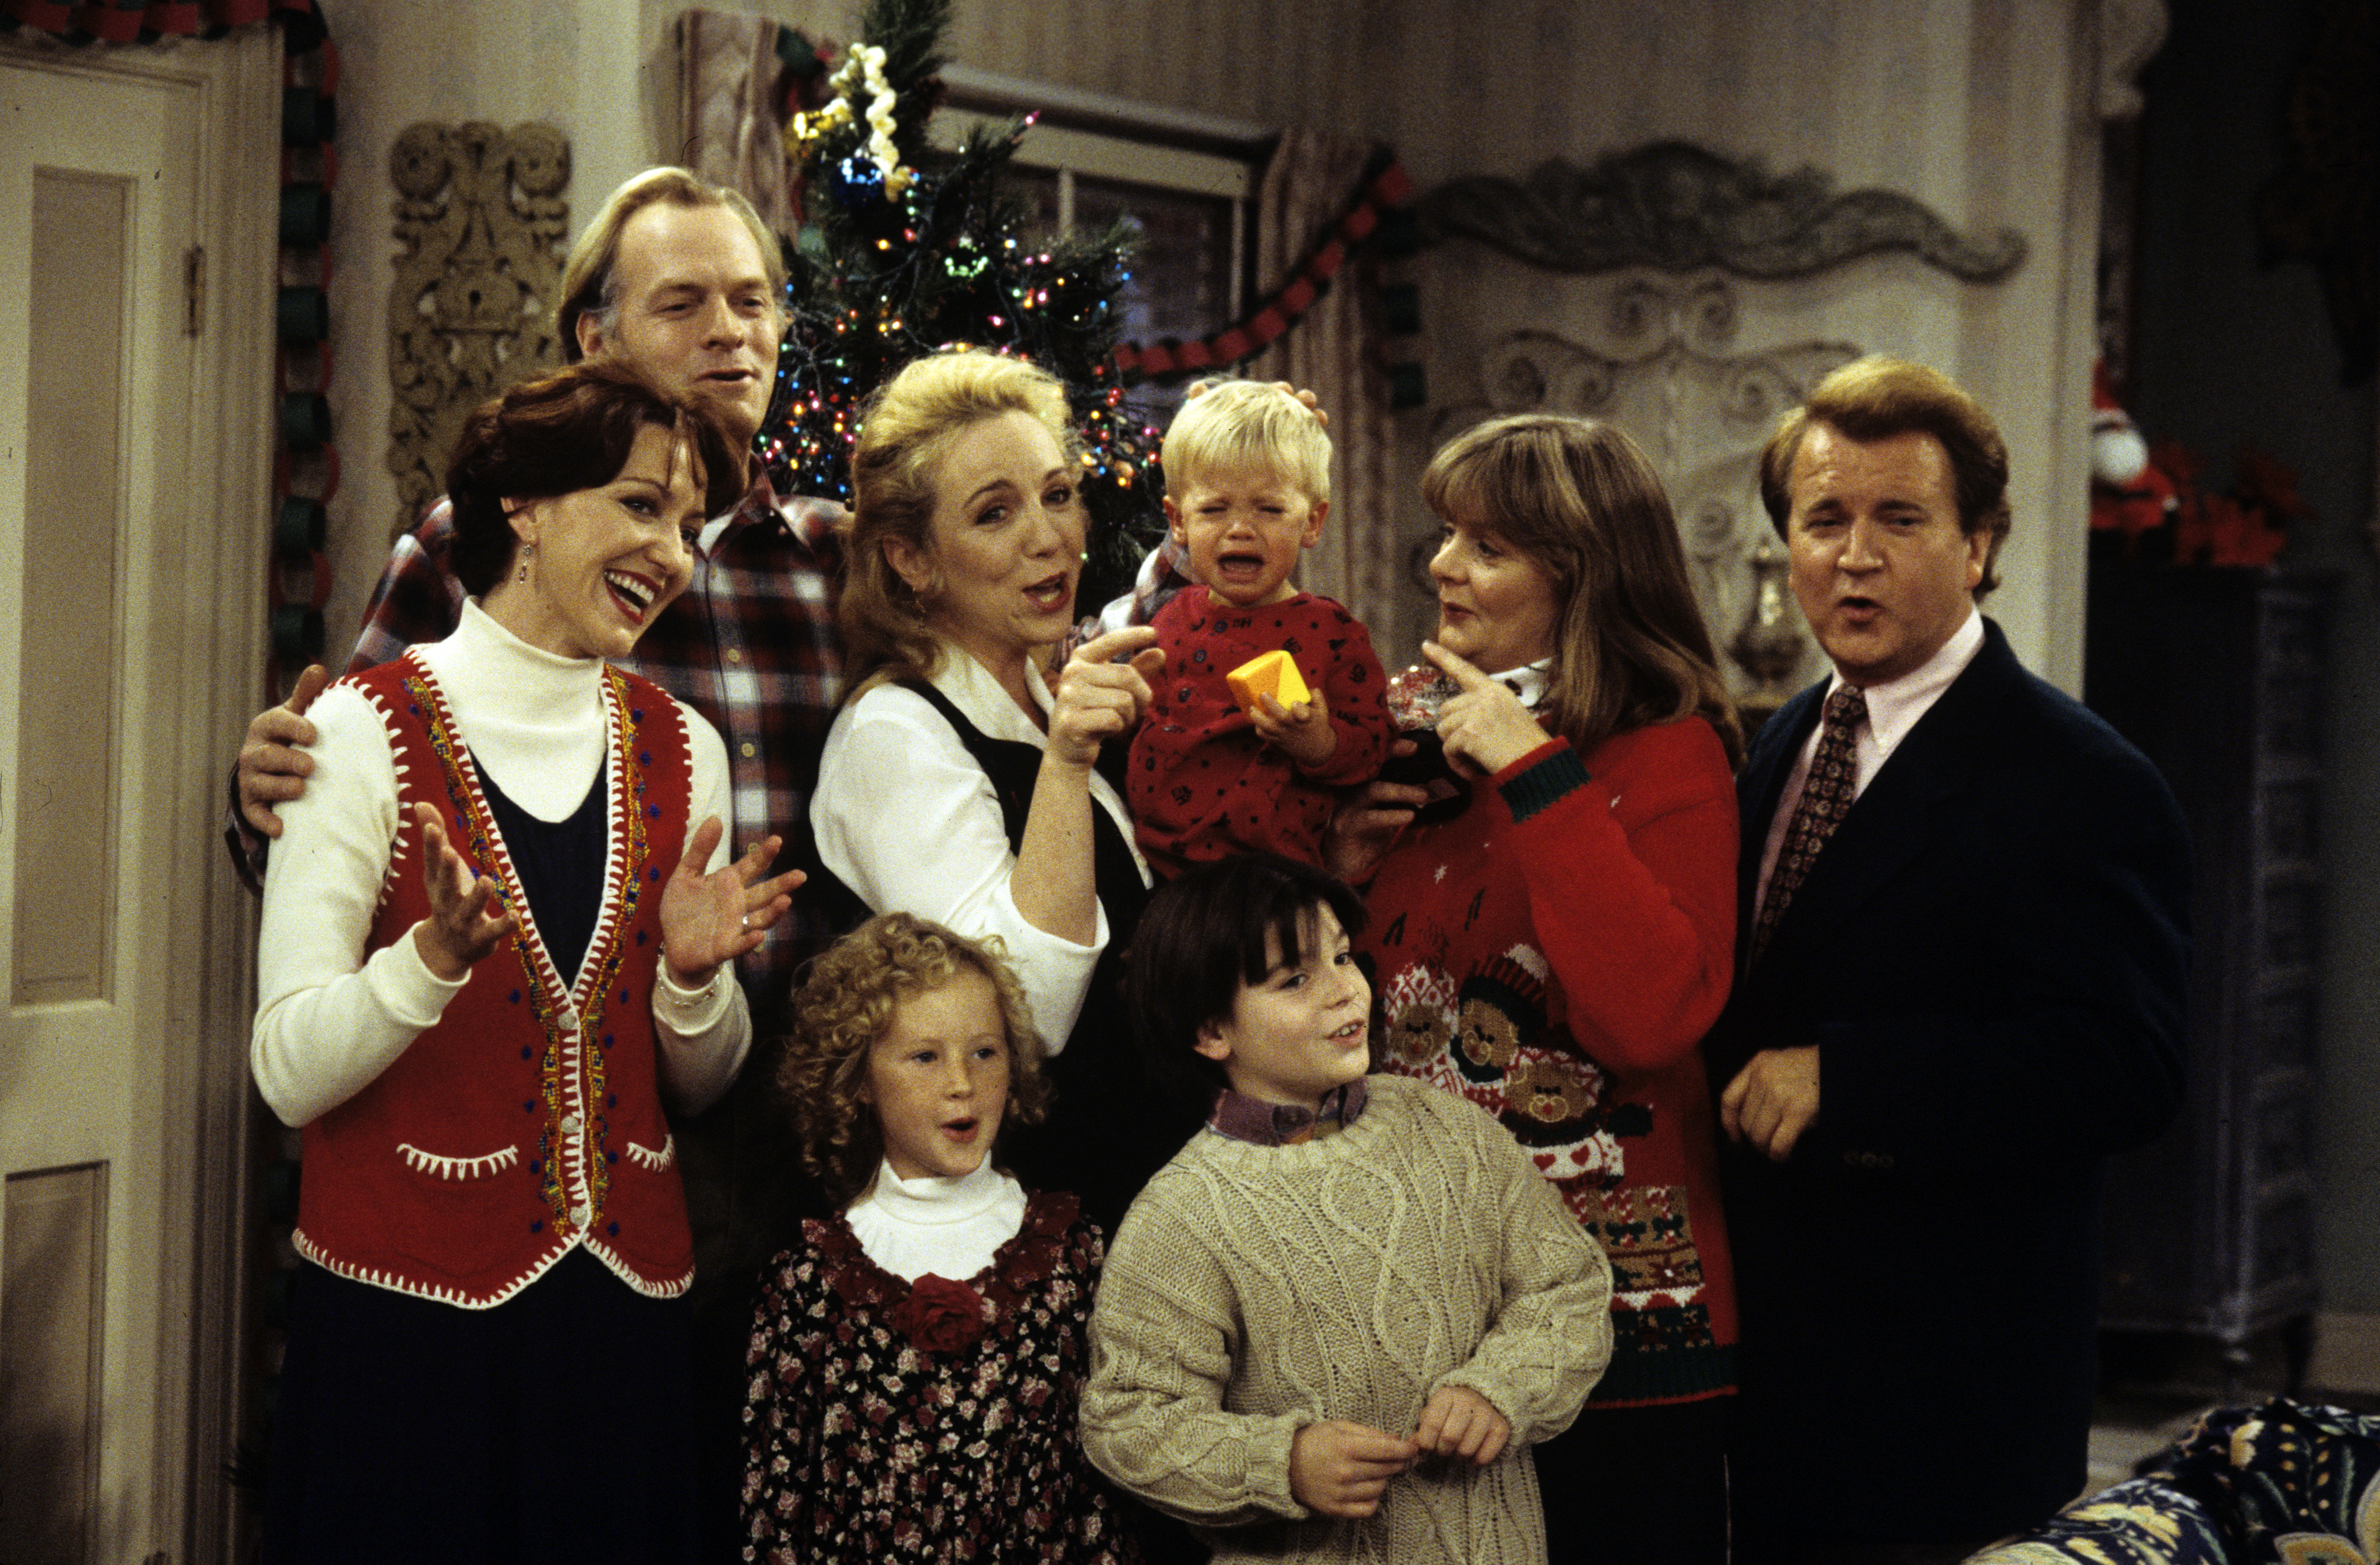 Julie White, Casey Sander, Brett Butler, Kaitlin Cullum, Dylan/Cole Sprouse, Jon Paul Steuer, Valri Bromfield, and Dave Thomas in "Grace Under Fire" on December 15, 1993 | Source: Getty Images